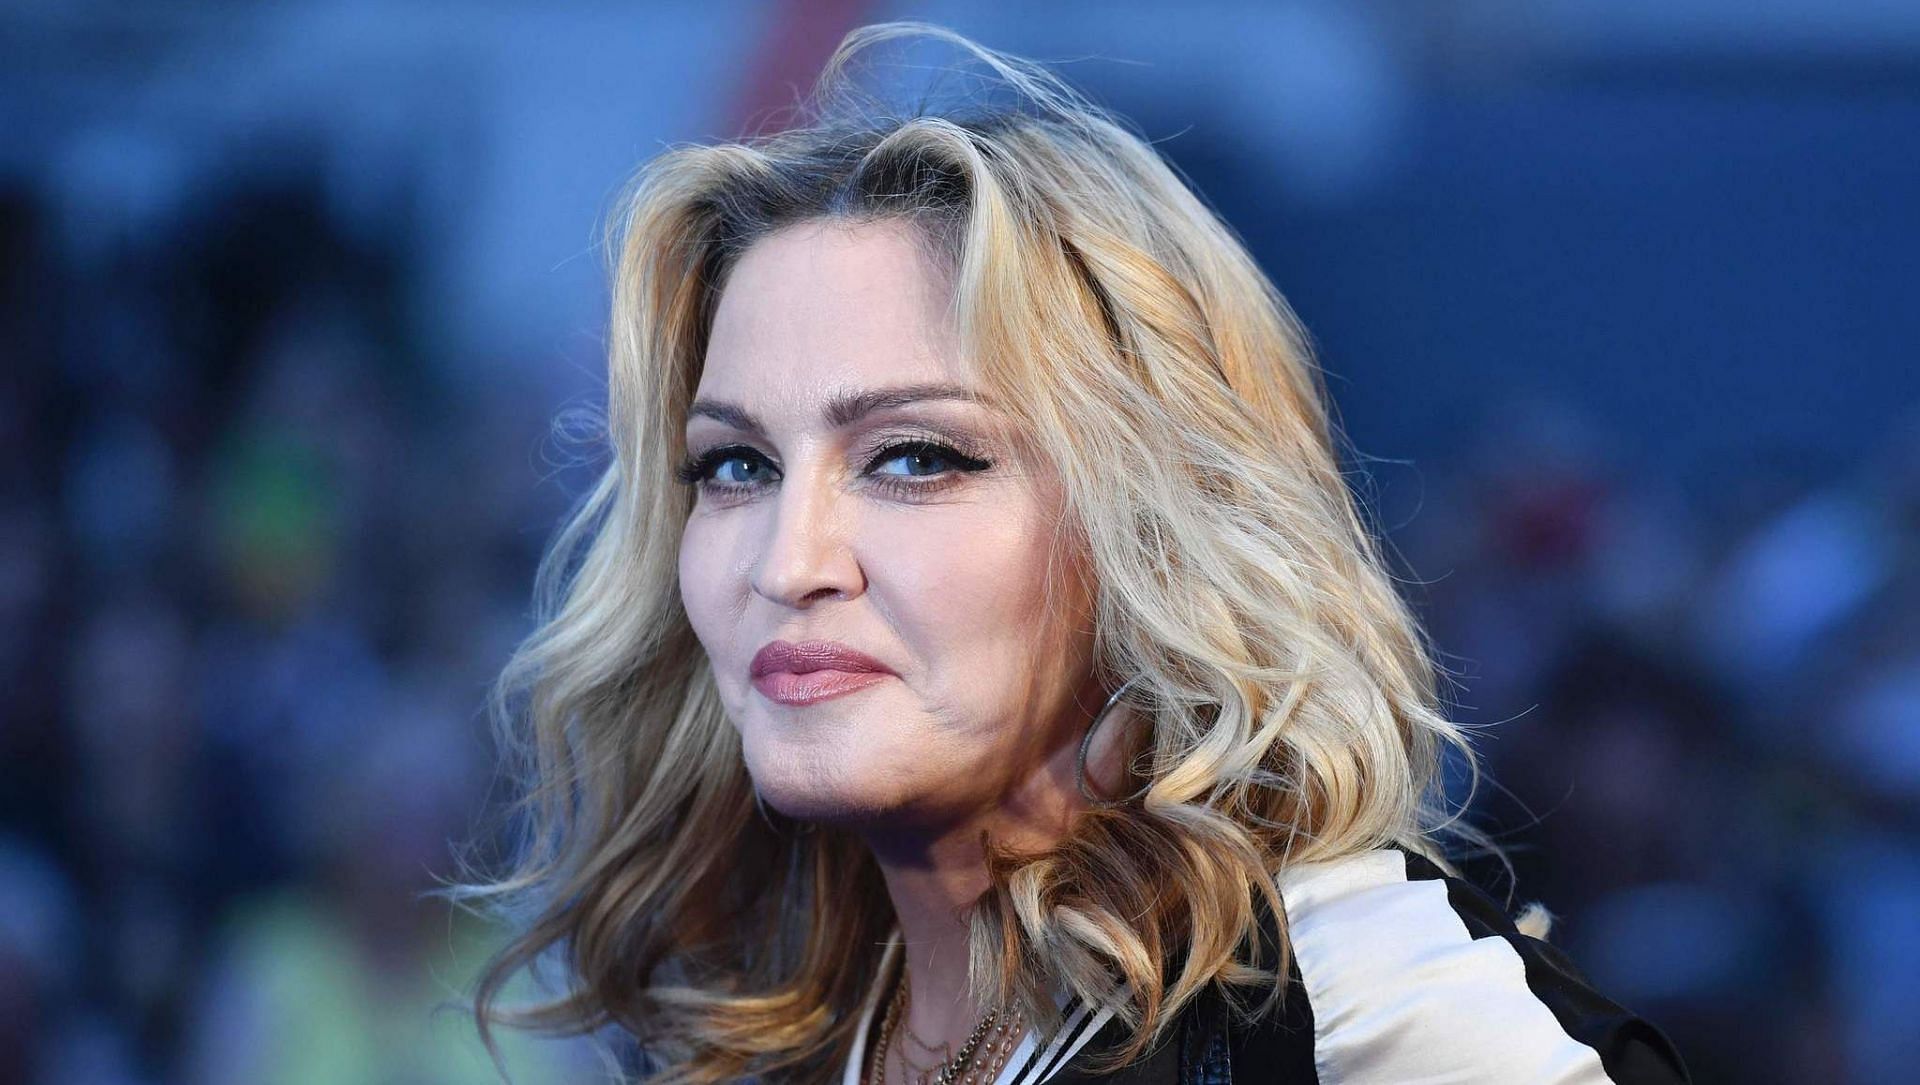 Madonna is a proud mother to six children (Image via Getty Images)